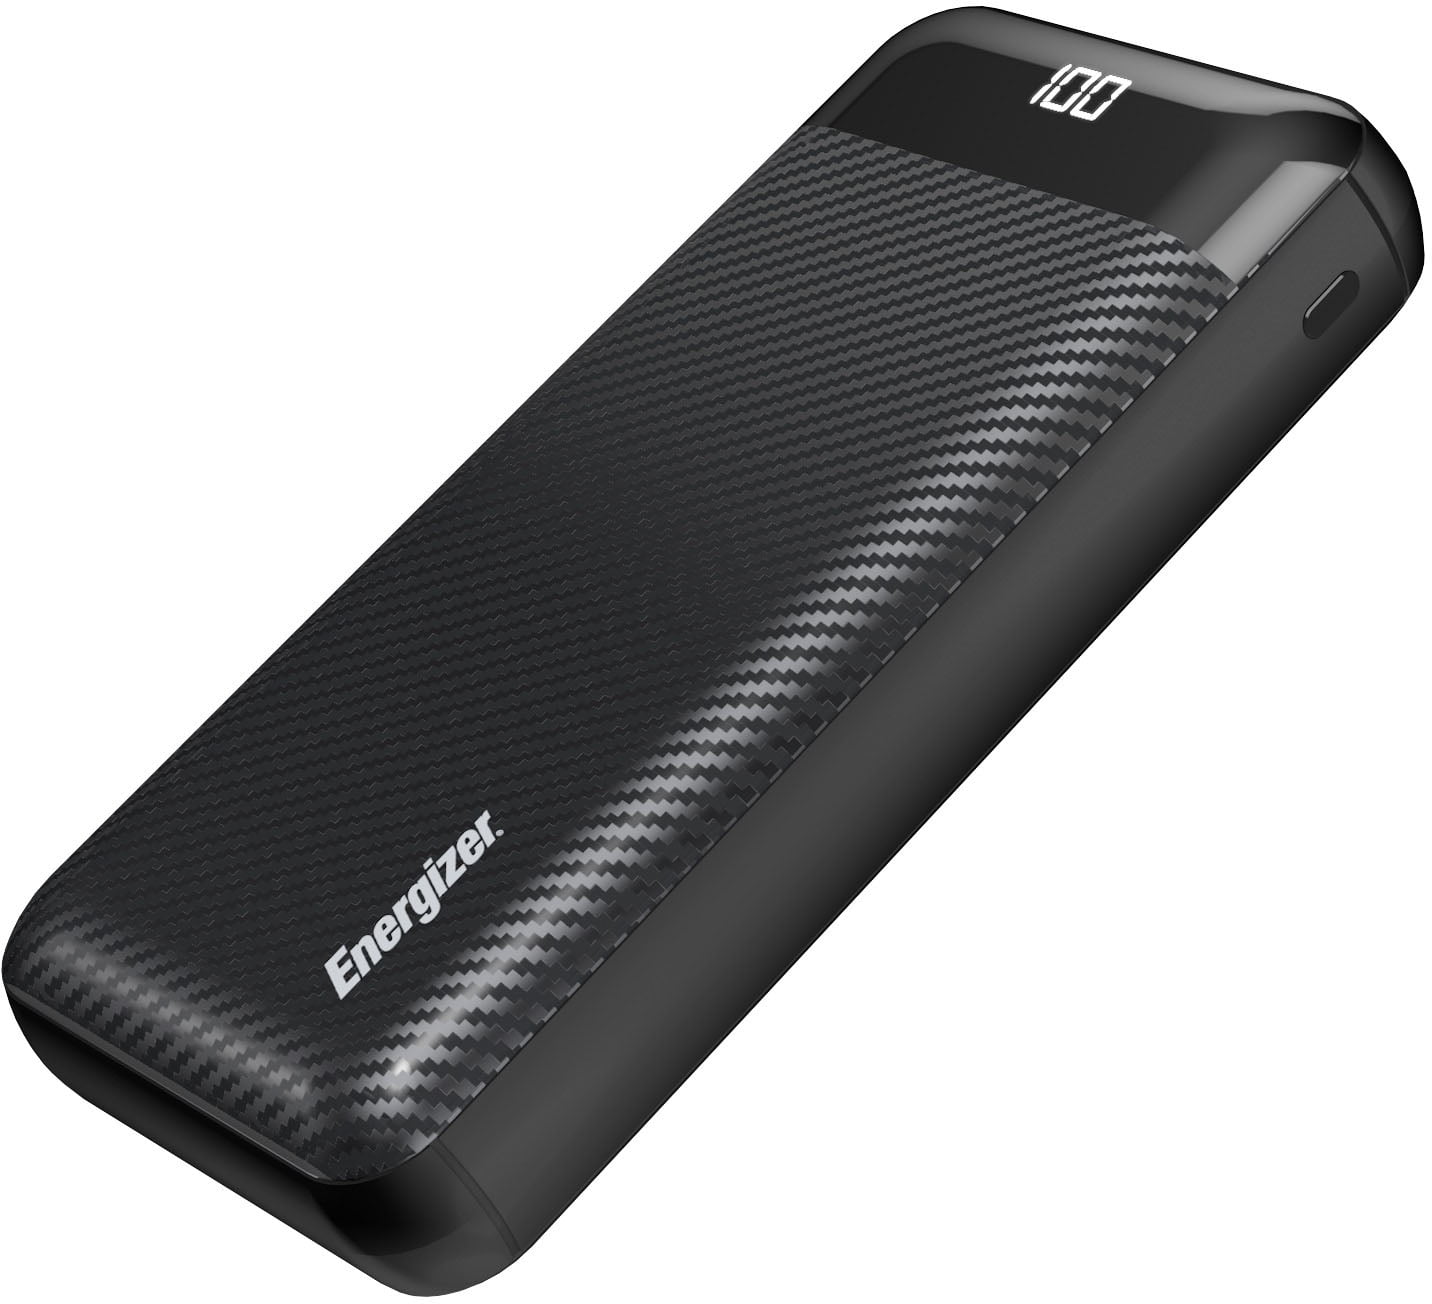  Energizer Power Bank - 20000mAh High Capacity Lithium Polymer  Portable Charger, Lightweight, Fast Charging, Dual USB Outputs, TSA  Approved, Compatible with iPhone, Samsung, Tablets and More - UE20058 :  Cell Phones